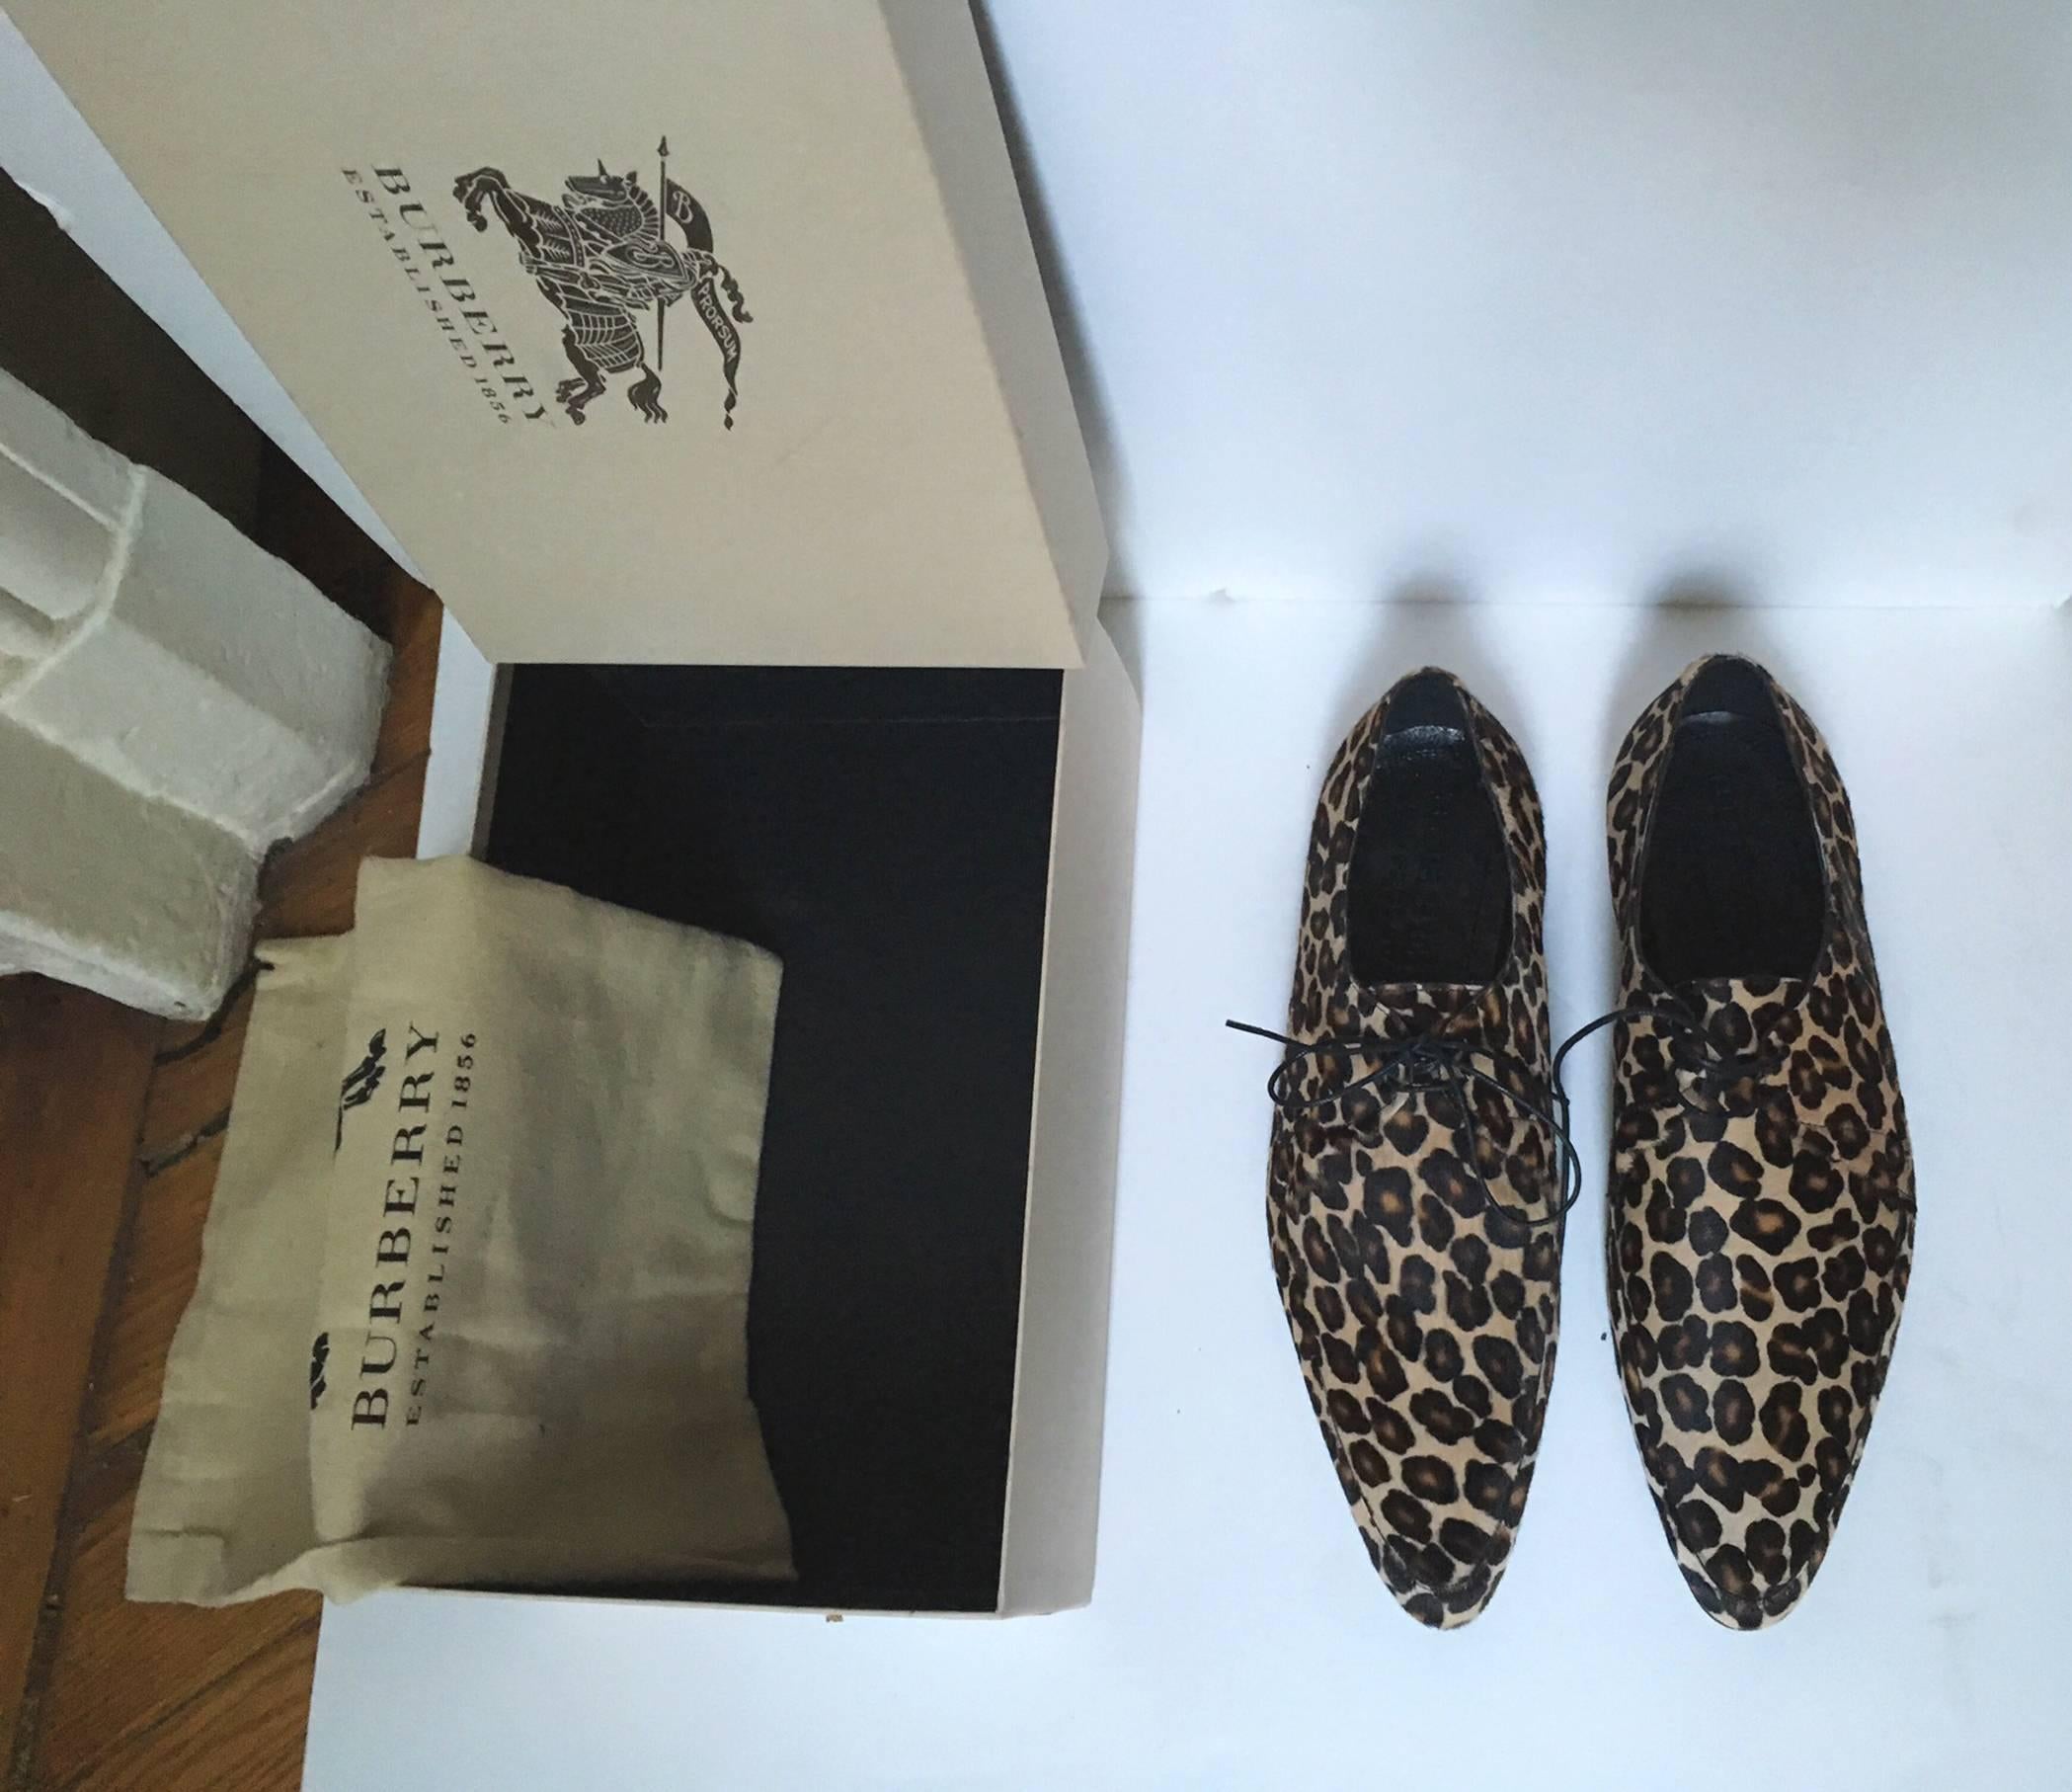 Burberry Prorsum Men's Leopard Print Calf Hair Derby Shoes new with box, unused
New condition .with original box and bag ,A brand new ,unused, unworn and undamaged pair of Burberry Derby style Calf hair leopard Print shoes .

Size :43 european -10